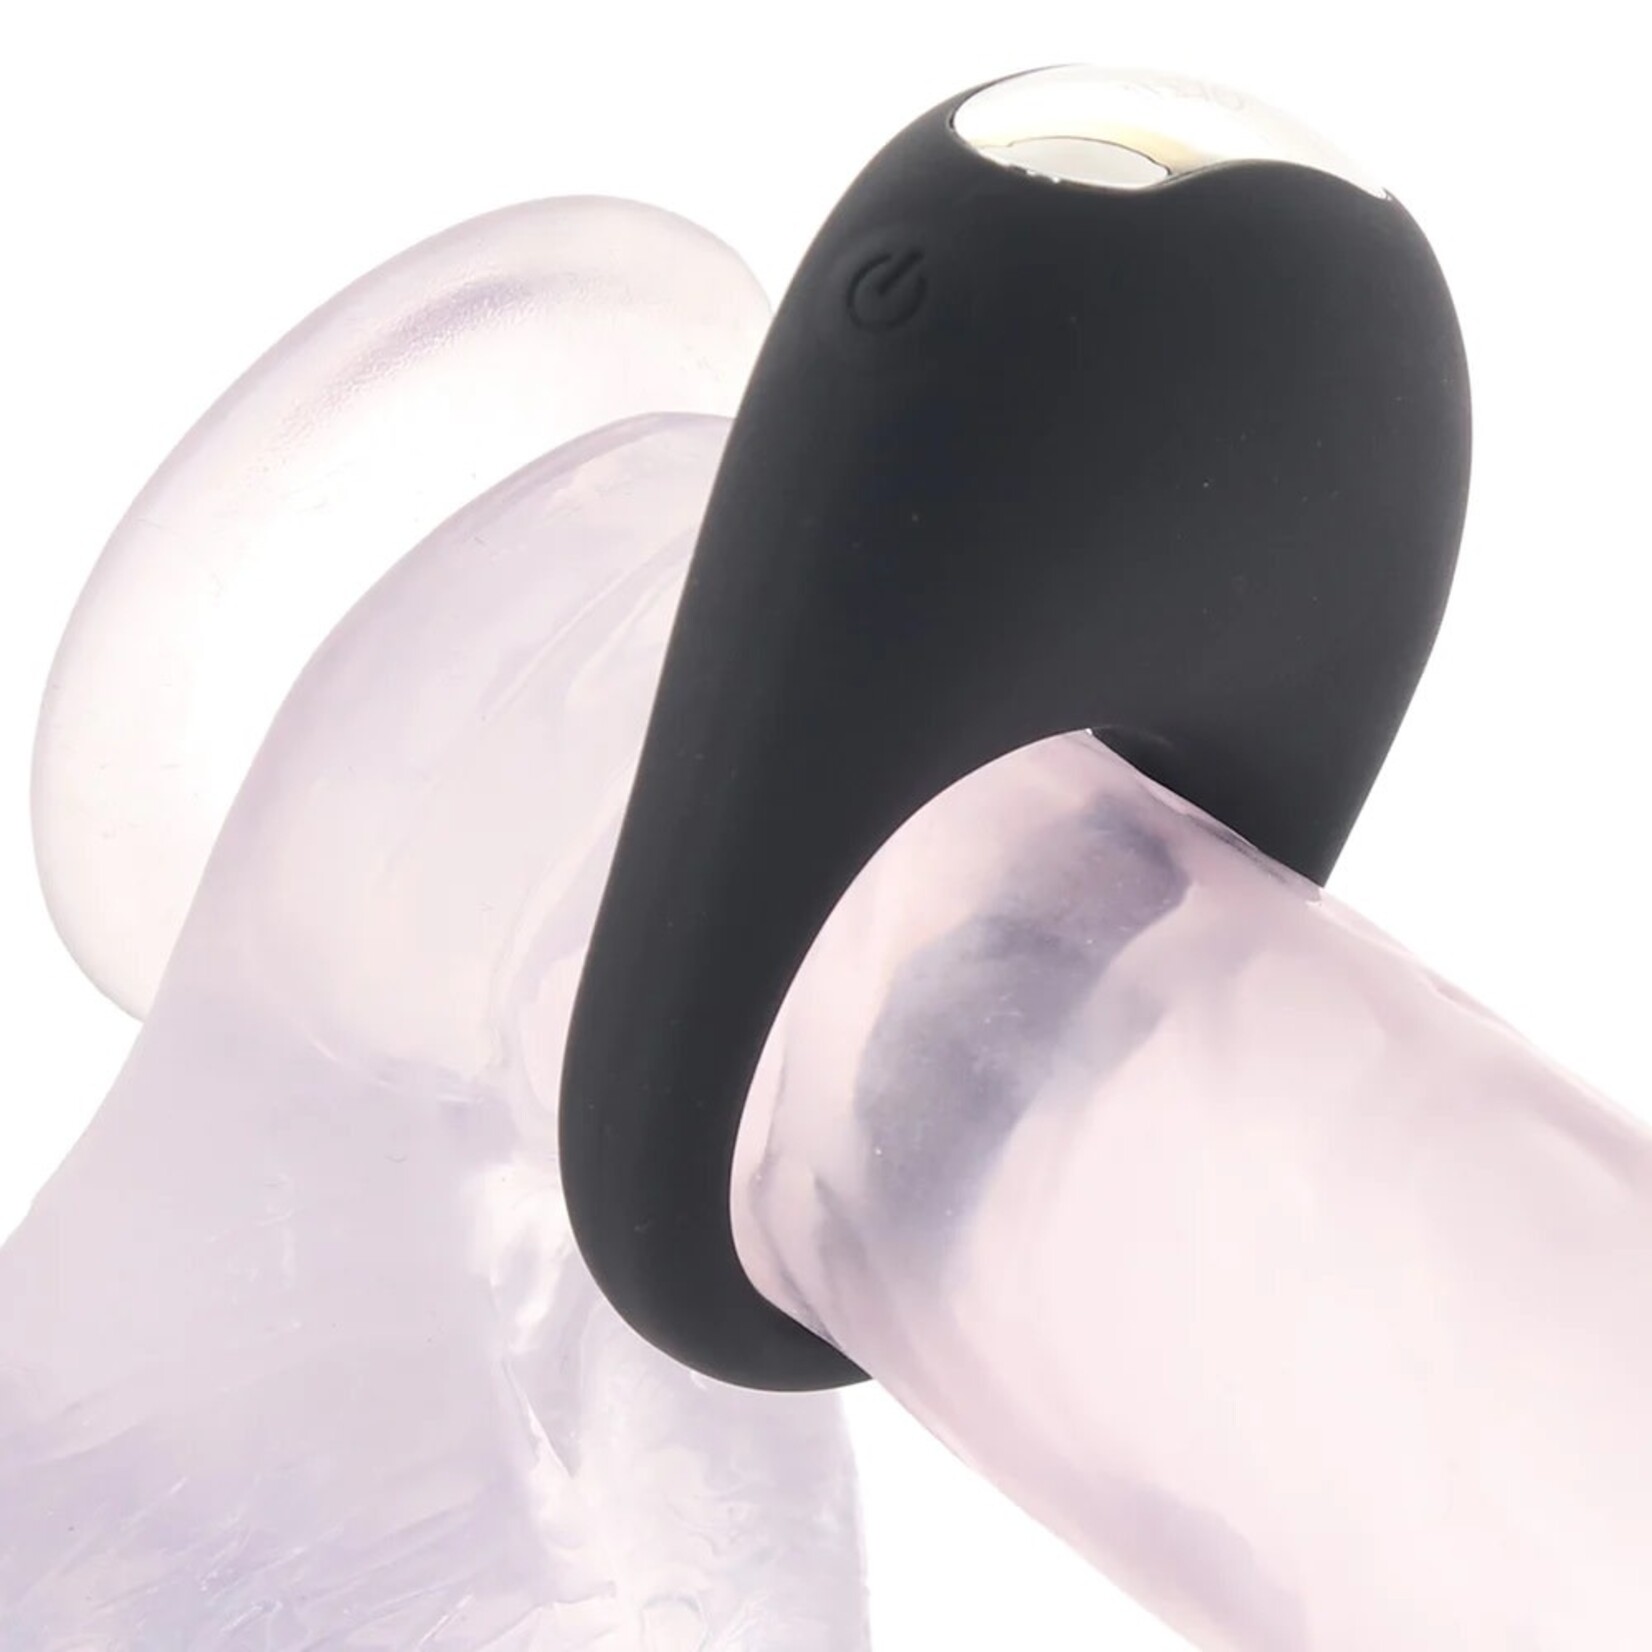 SATISFYER COUPLE'S ENHANCERS SILICONE RECHARGEABLE PLEASURE RING